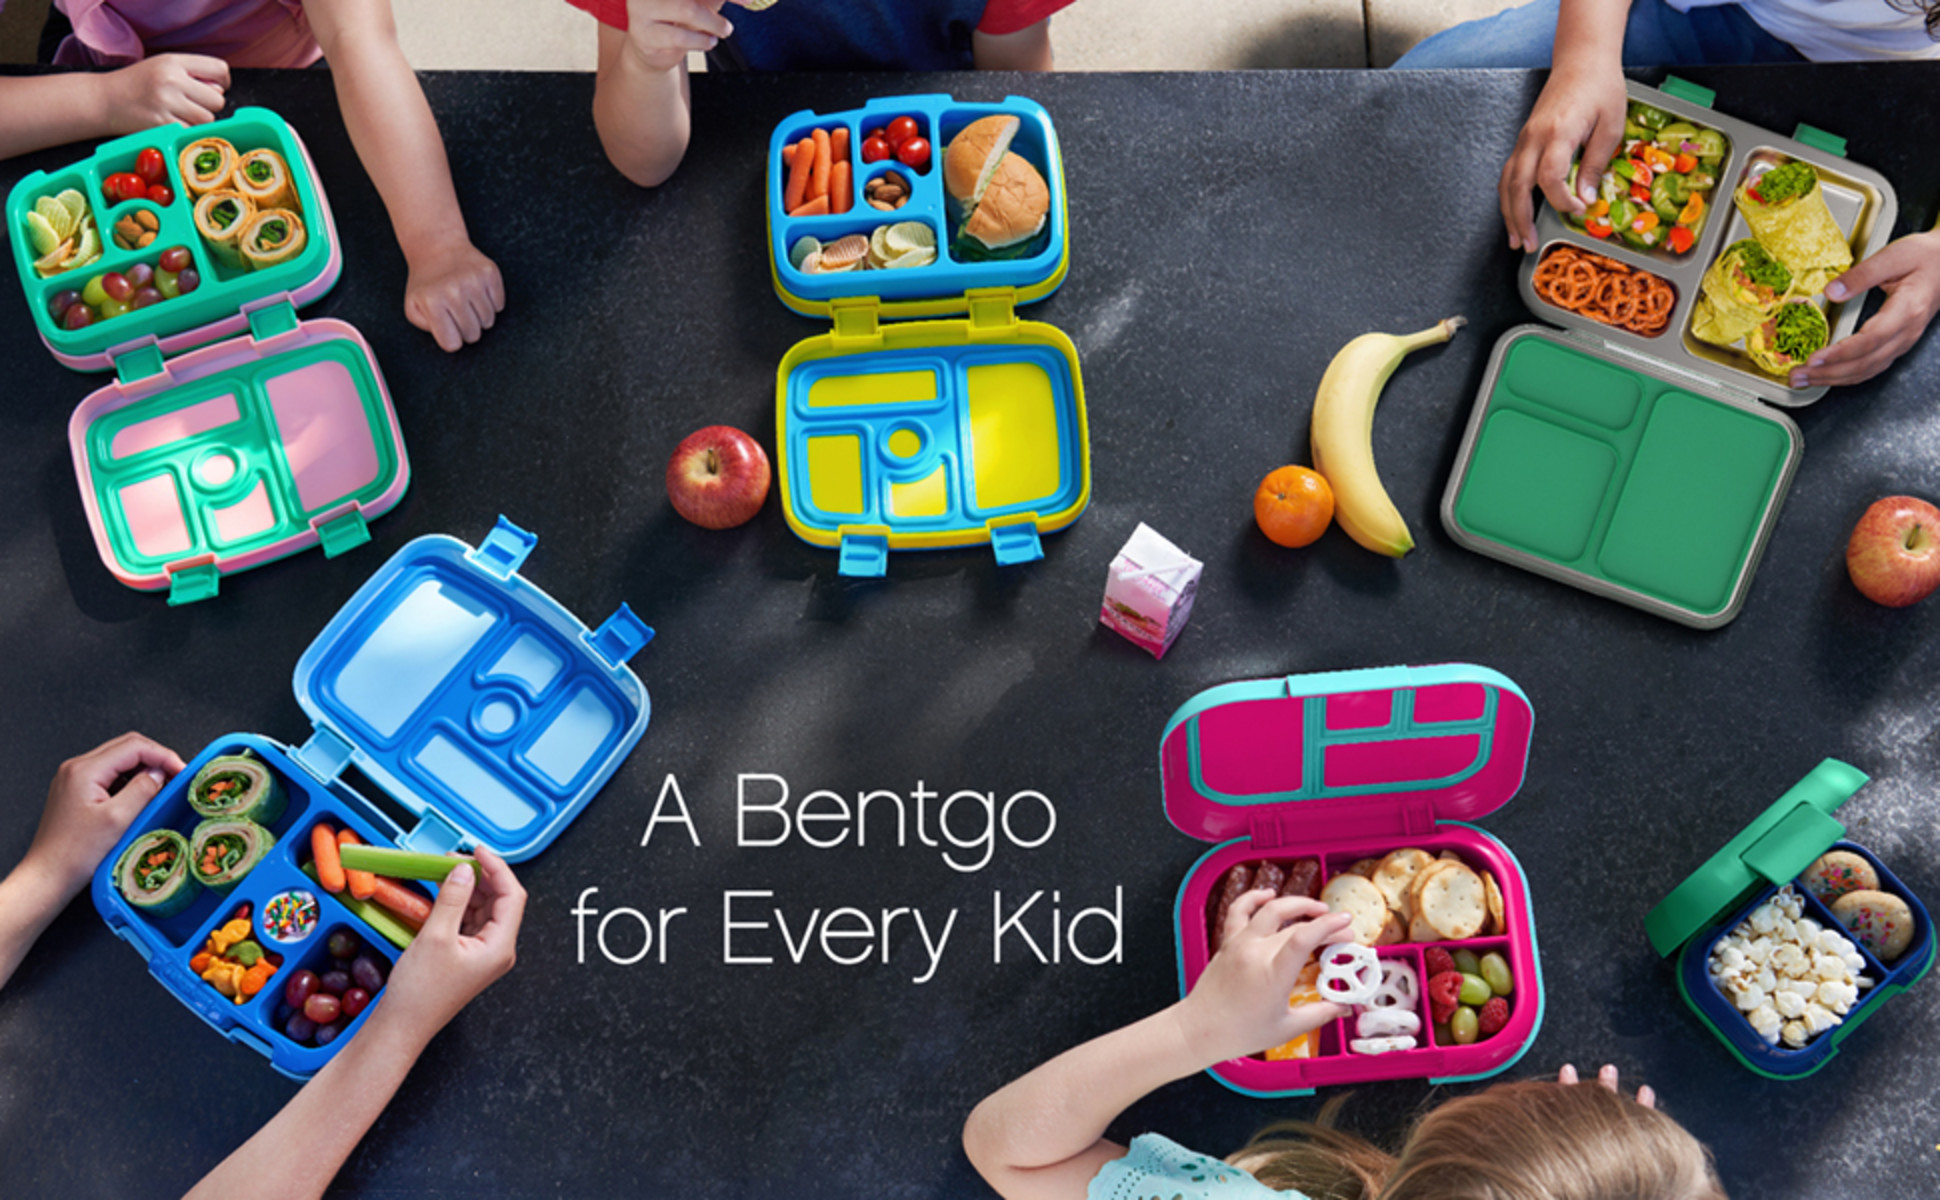  Bentgo® Kids Chill Lunch Box - Leak-Proof Bento Box with  Removable Ice Pack & 4 Compartments for On-the-Go Meals - Microwave &  Dishwasher Safe, Patented Design, 2-Year Warranty (Red/Royal): Home 